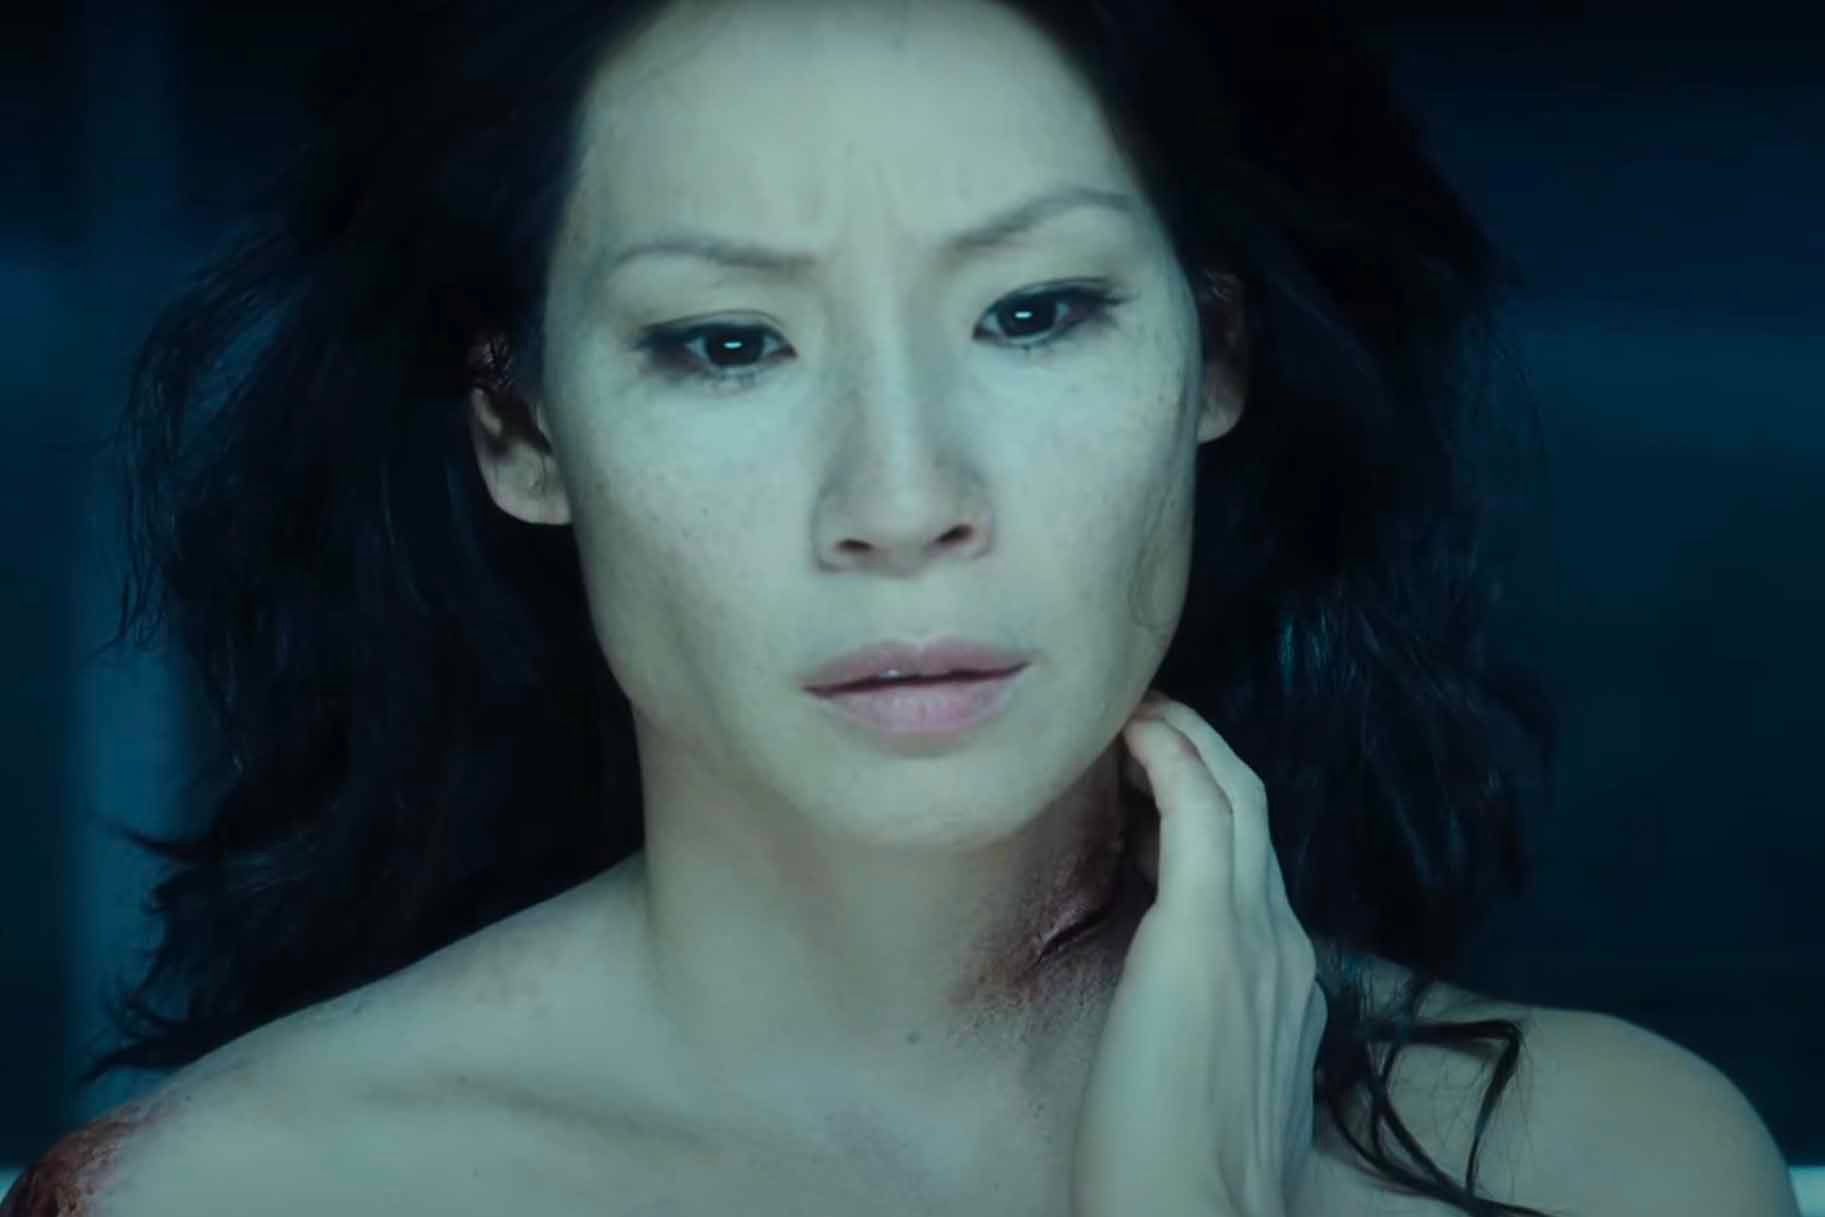 Sadie Blake (Lucy Liu) touches a gash in her neck in Rise: Blood Hunter (2007).